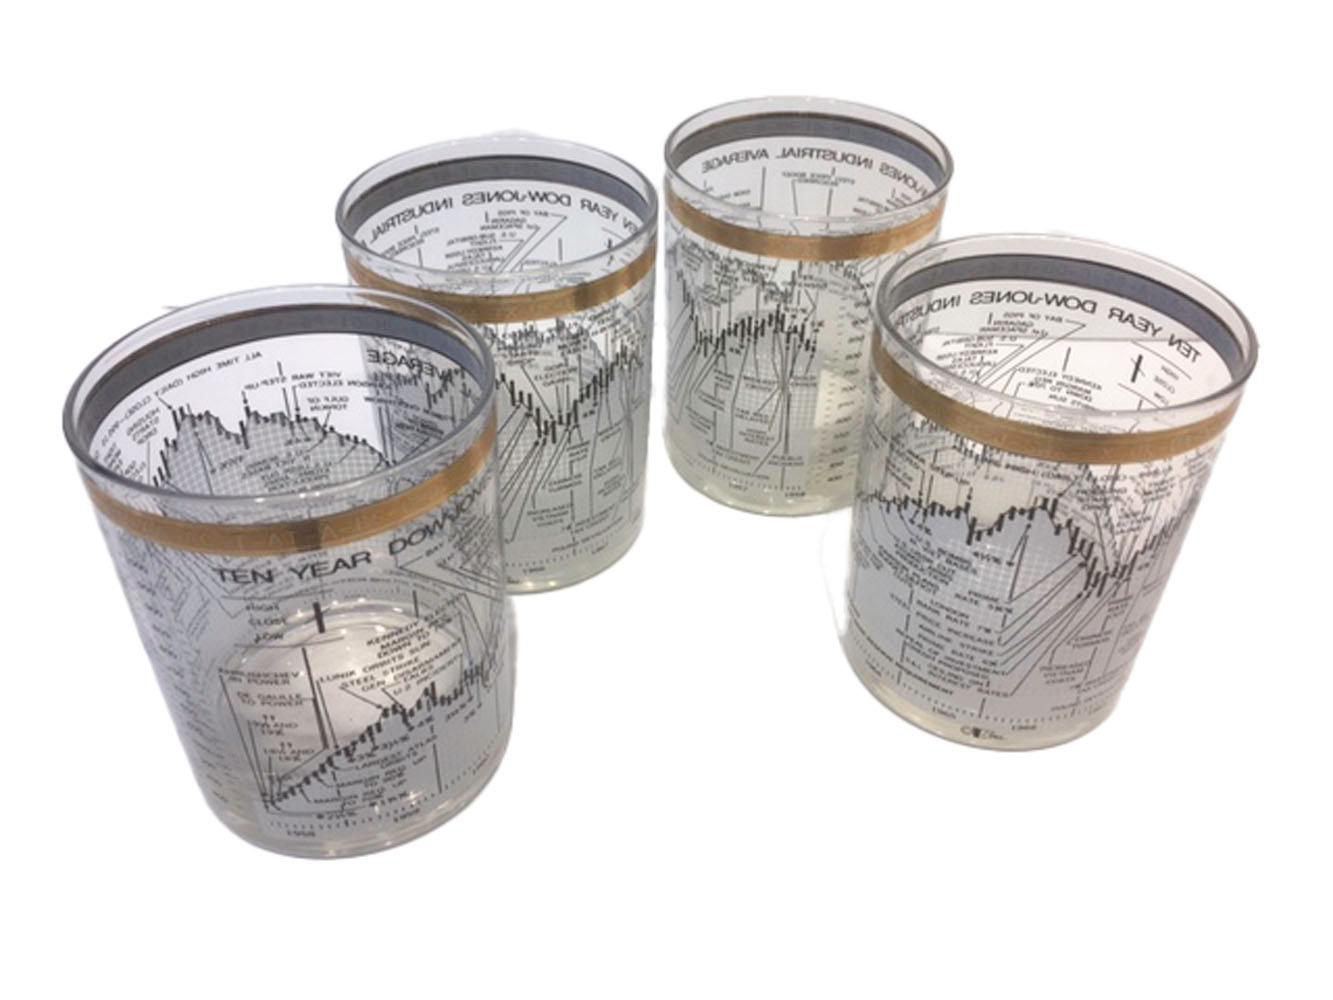 Four vintage rocks glasses by Cera Glassware. Ten Year Dow-Jones Industrial Average for the period from 1958-1968, with a graph in black on white showing the changes in the market along with world events that influenced the changes. The top of each